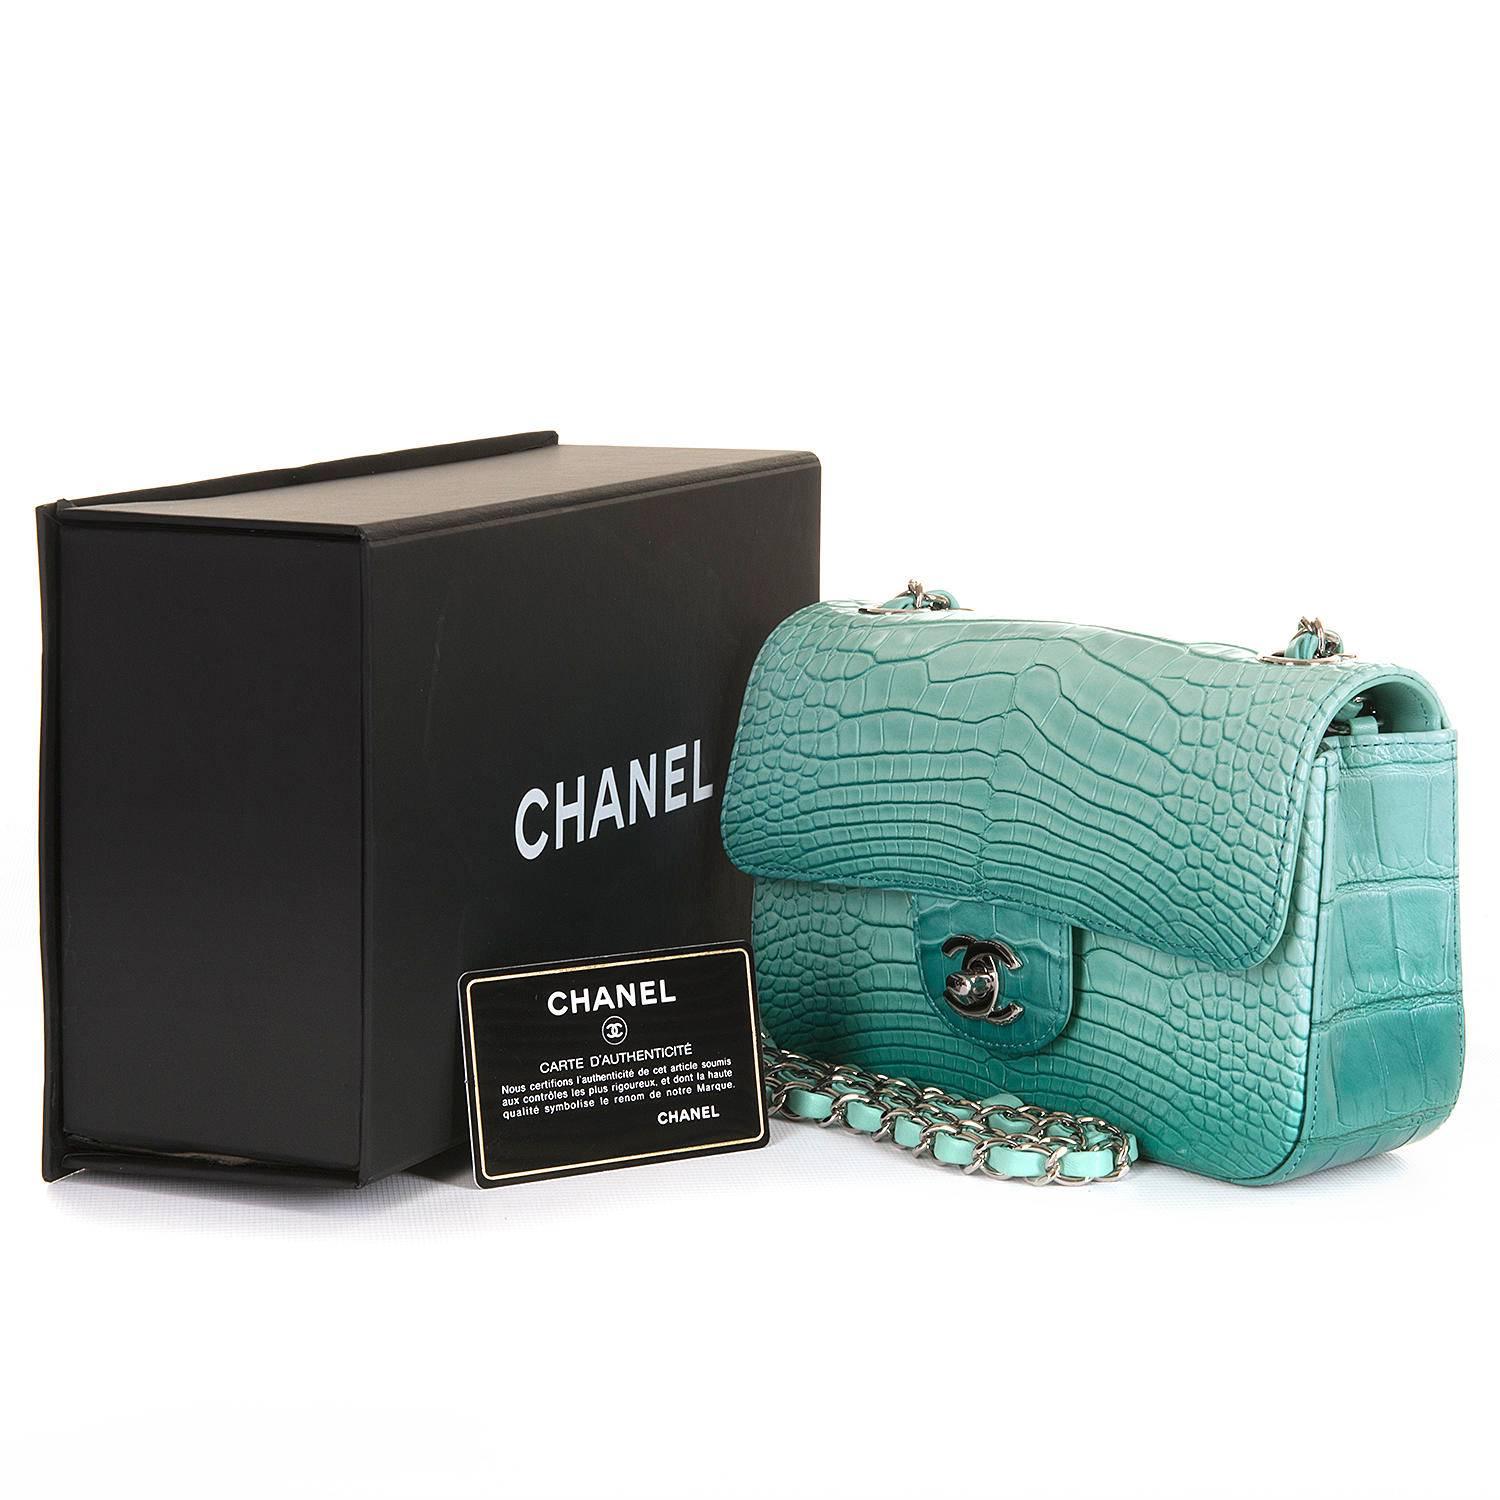 An absolutely Sensational Chanel New Mini Sac Timeless finished in Iced-Turquoise Alligator with Silver Palladium Hardware.This top of the range Chanel bag has never been worn and still retains the plastics on some of it's hardware. Complete with